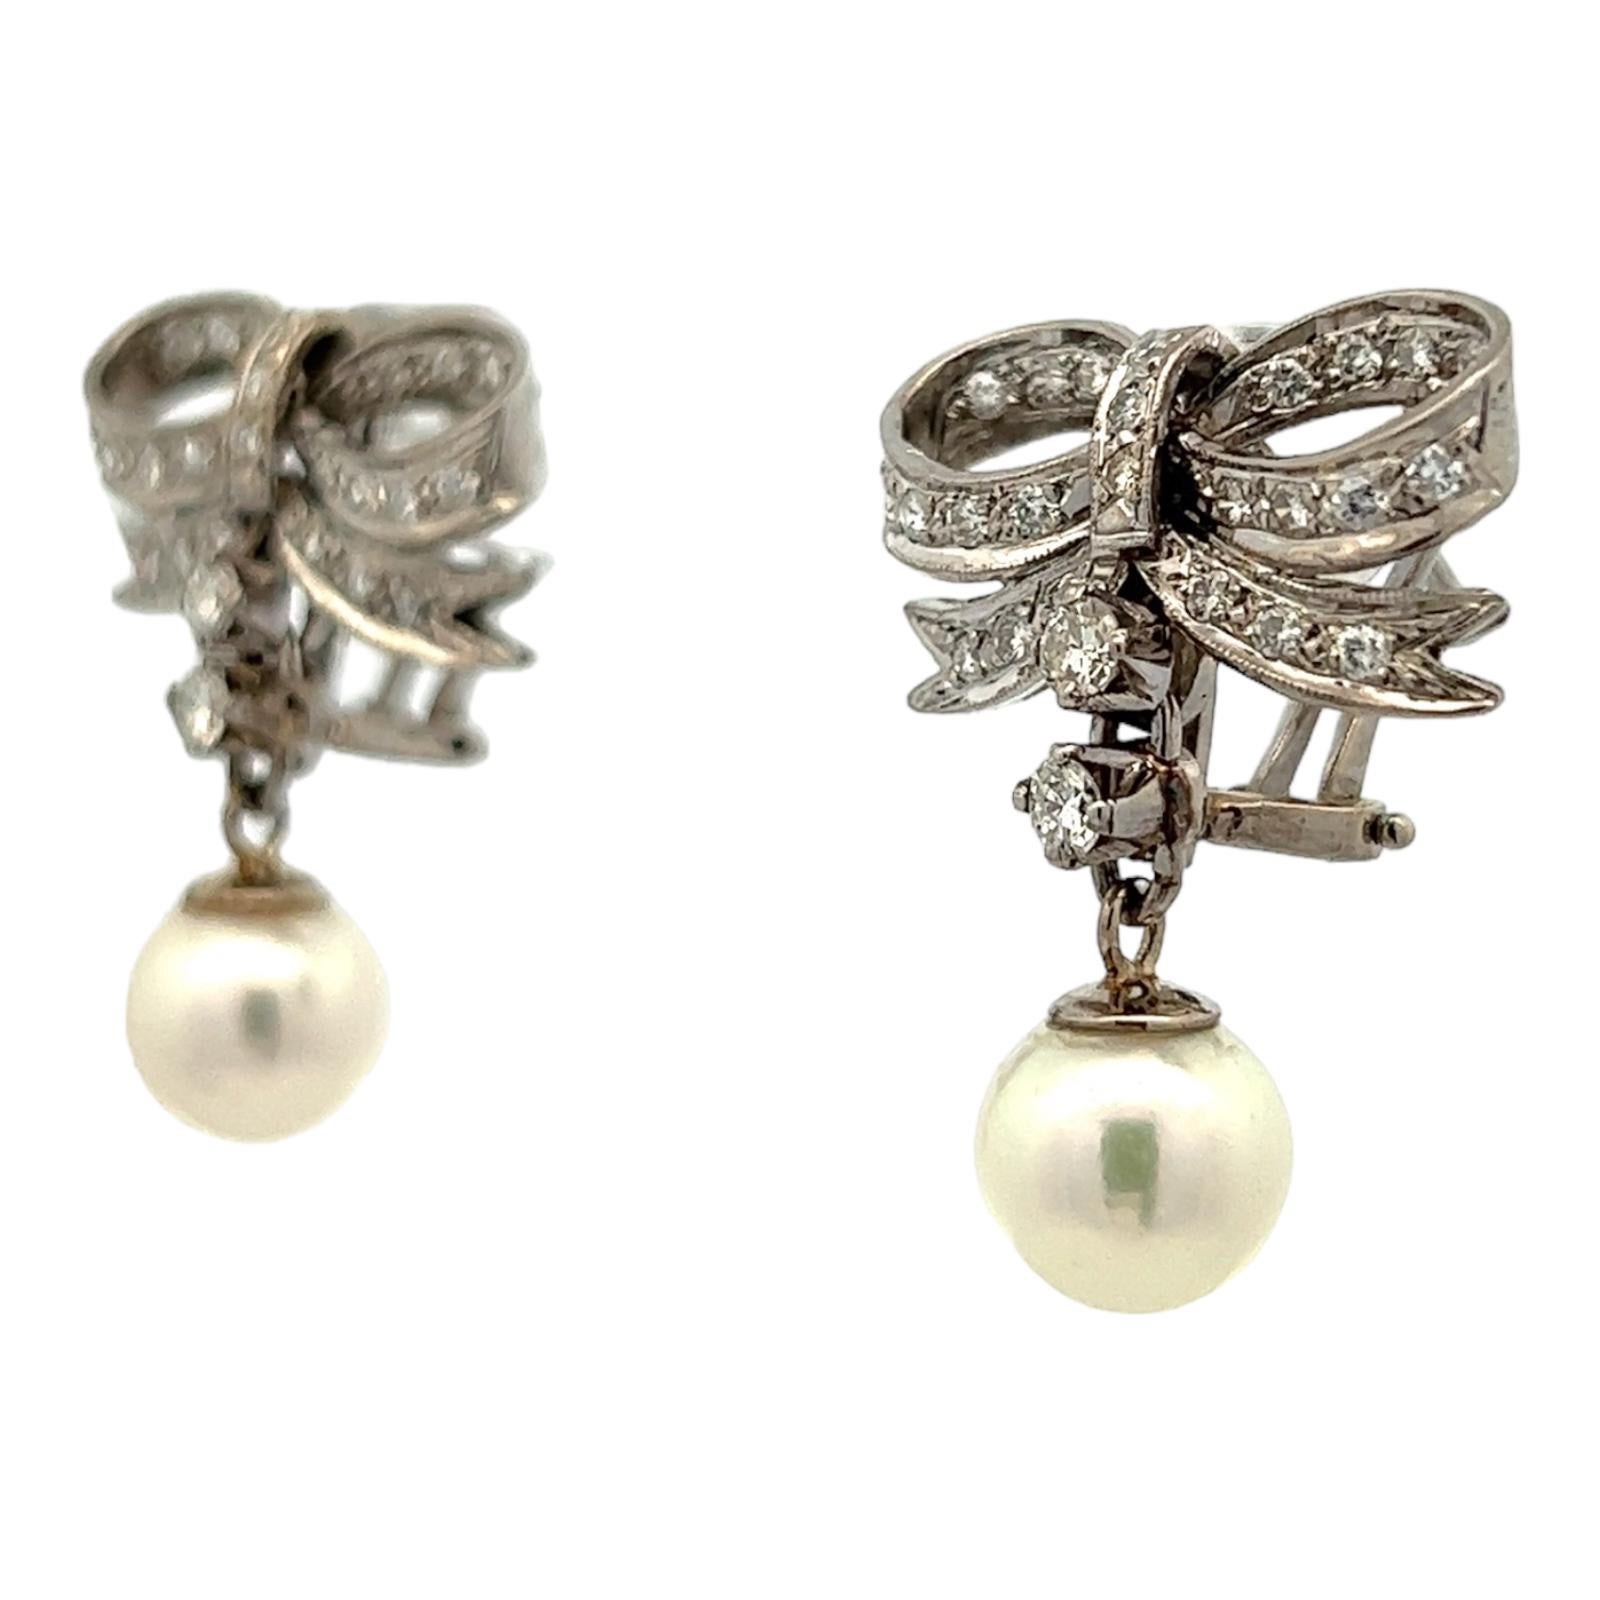 Mid 20th Century diamond ribbon earrings with cultured pearl drops are fashioned in 14 karat white gold. The ribbons feature round brilliant cut diamonds weighing approximately 1.00 CTW and graded H-I color and VS2-SI1 clarity. The earrings measure